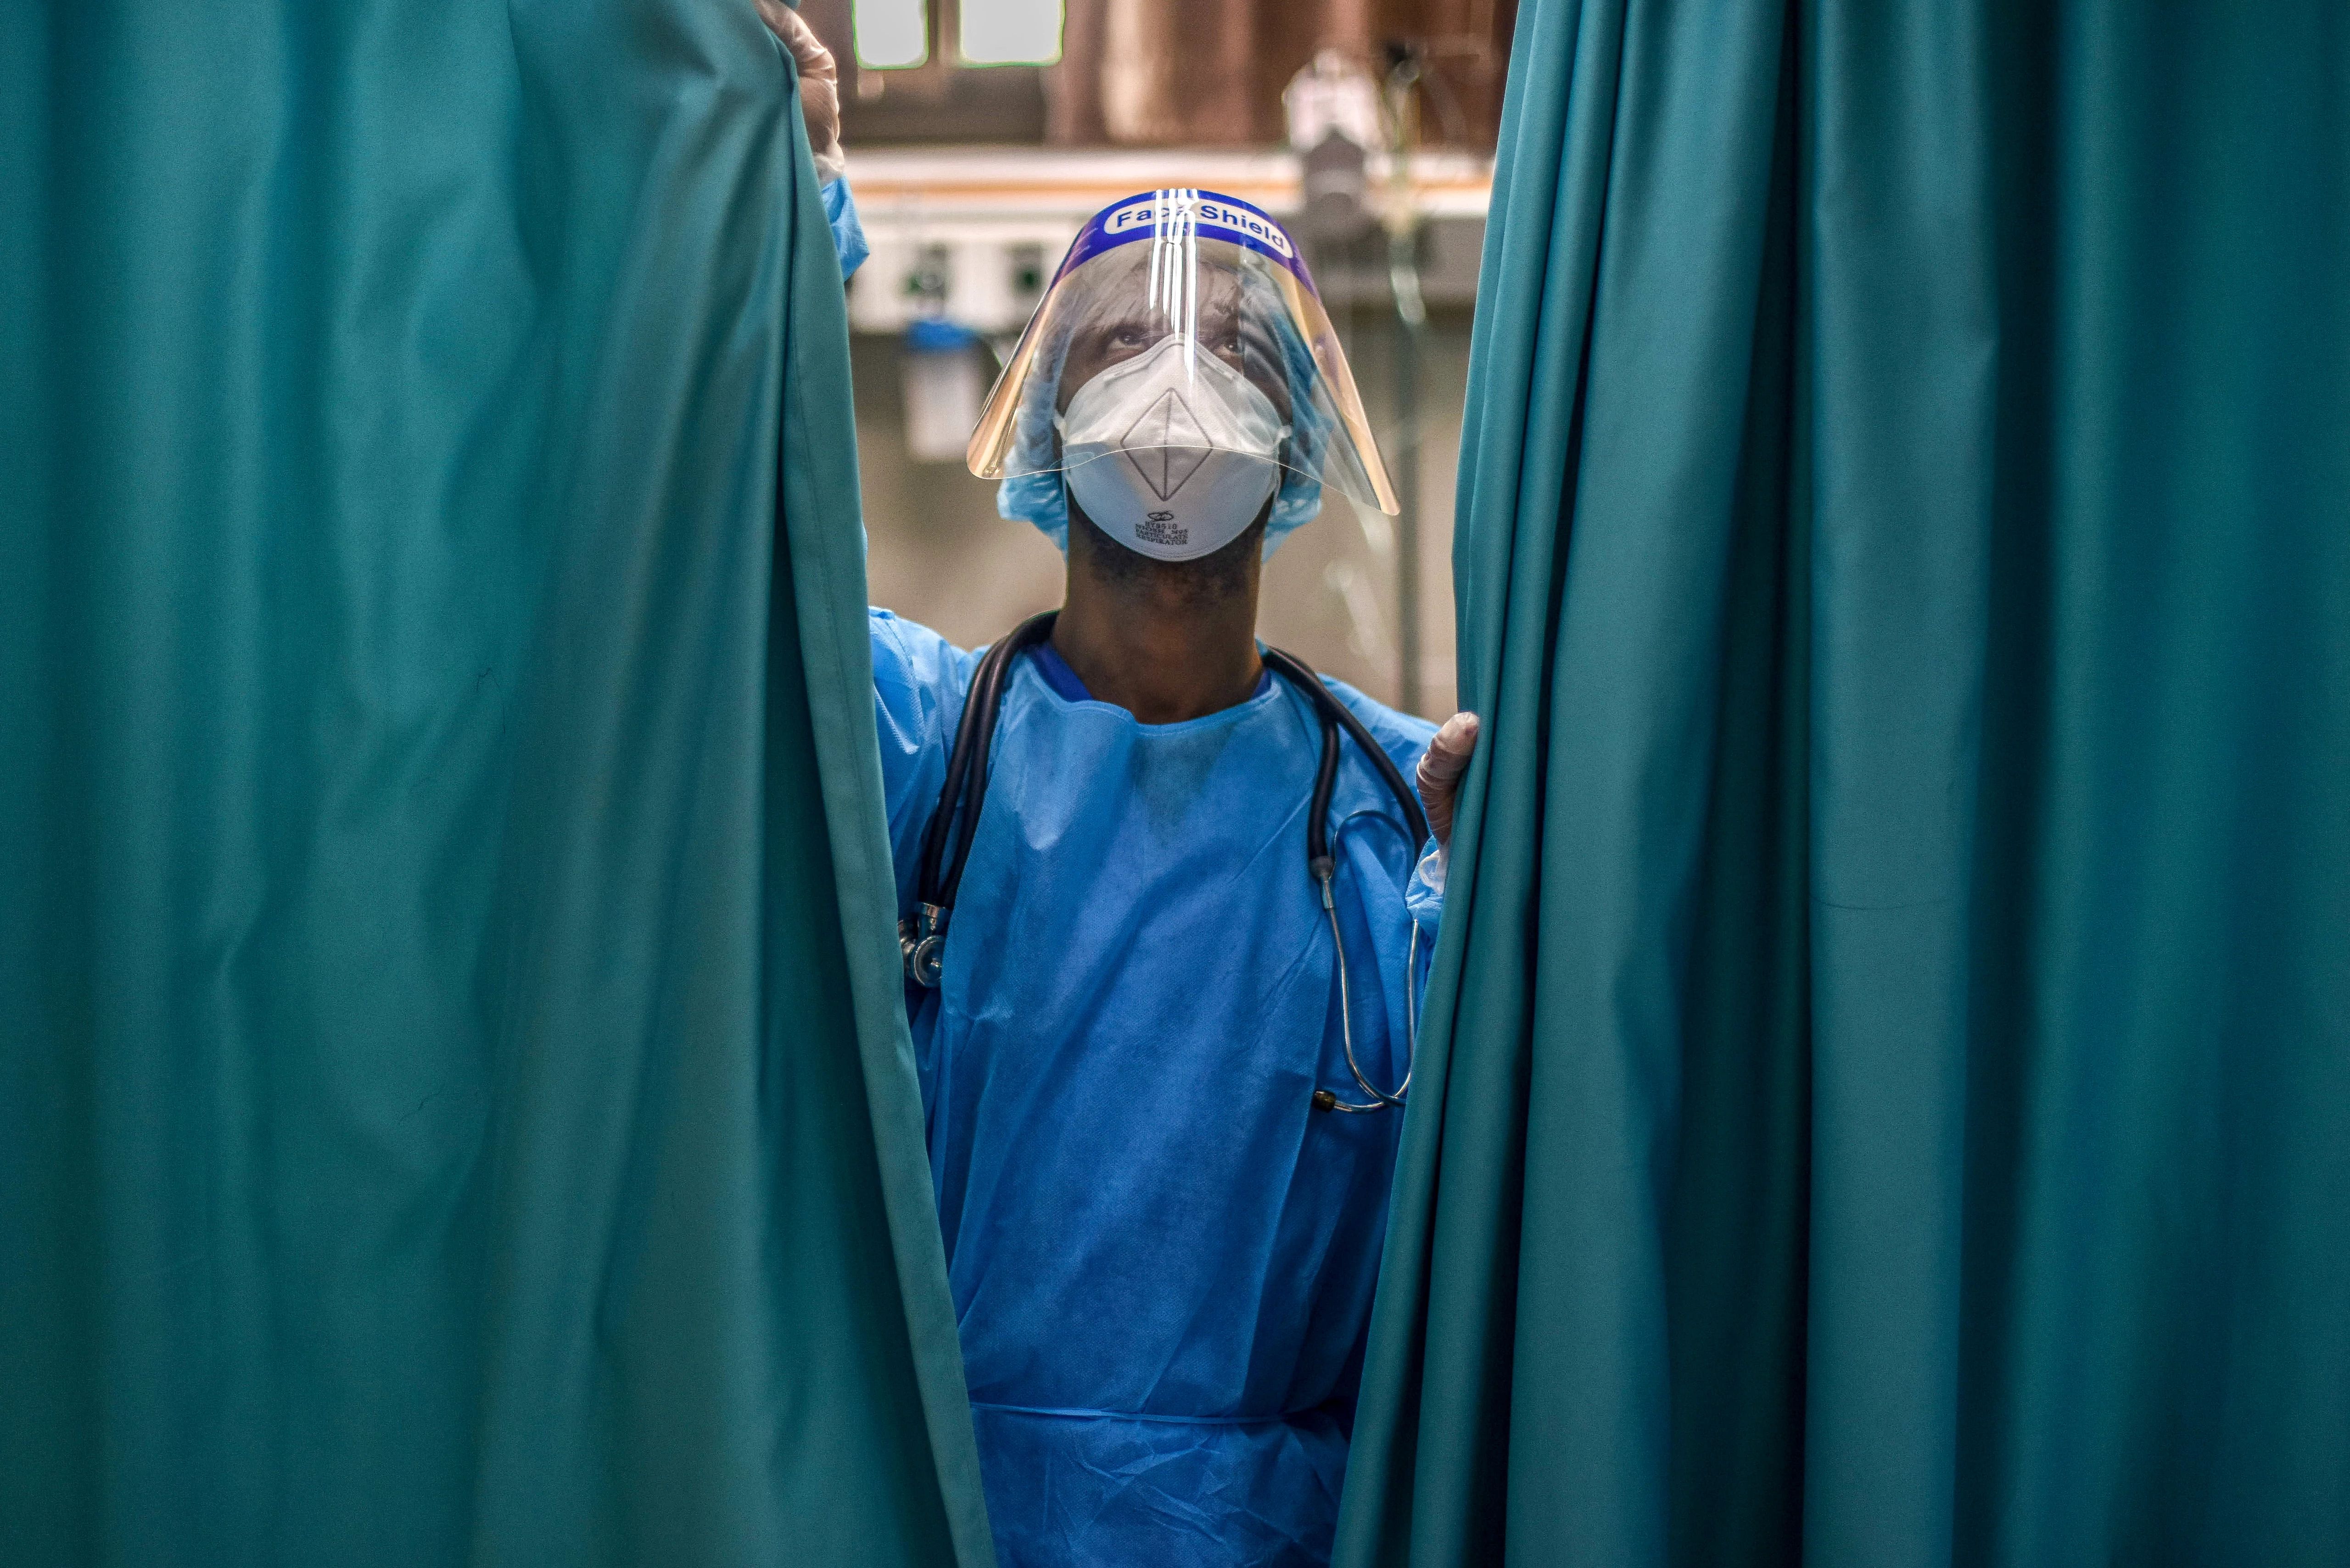 Person in a surgical mask and scrubs stands next to curtains